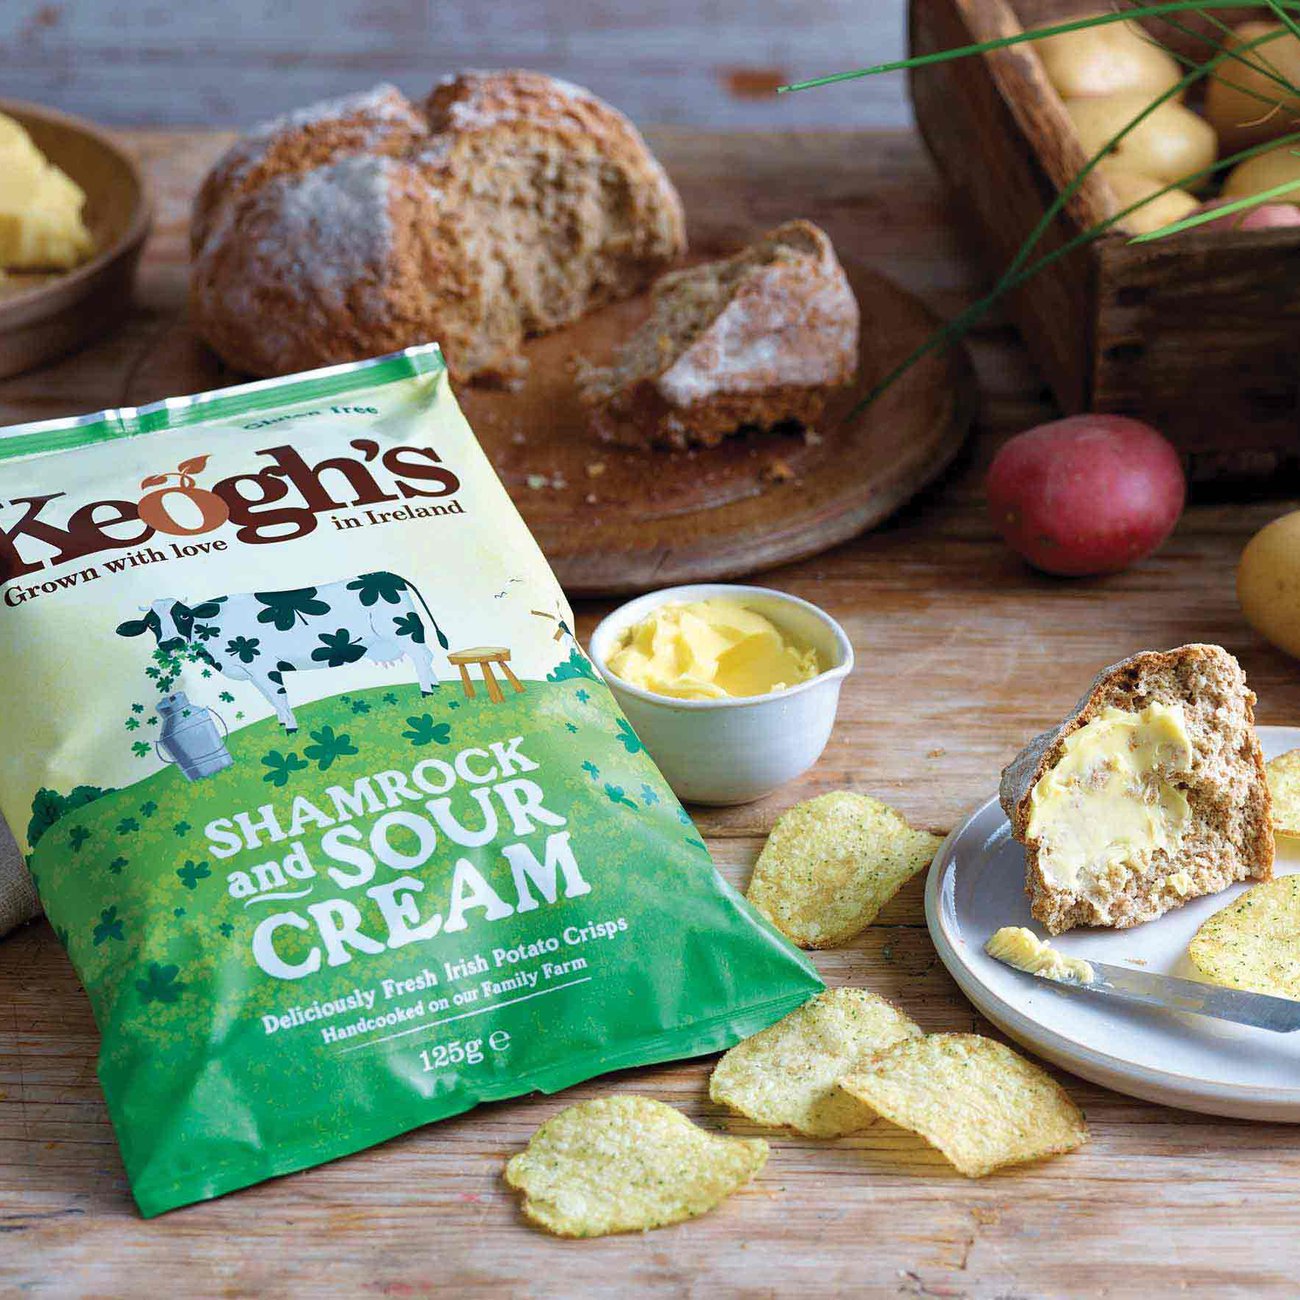 Keogh’s offers a range of natural and gluten-free flavours